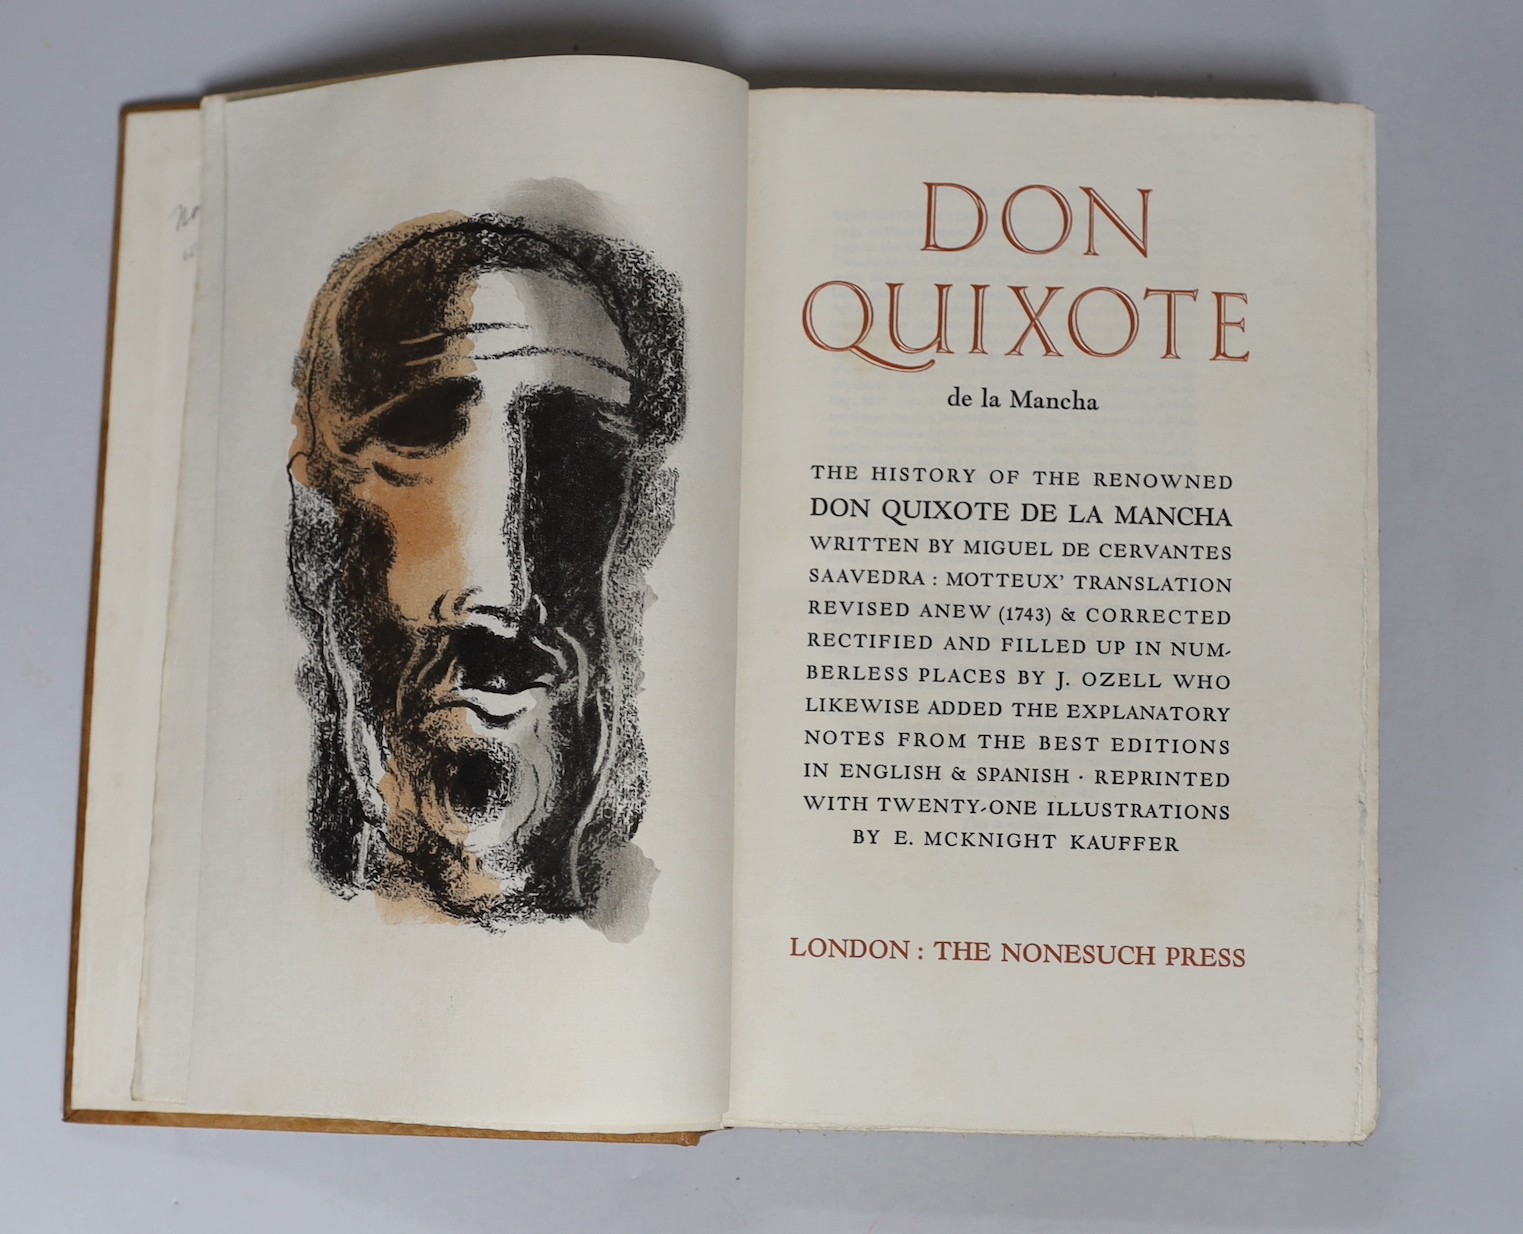 Nonesuch Press - Cervantes, Miguel de - The History of the renowned Don Quixote, 2 vols, illustrated with 21 colour plates by E. McKnight Kauffer, one of 1475, 8vo, tan niger, The Nonesuch Press, London, 1930